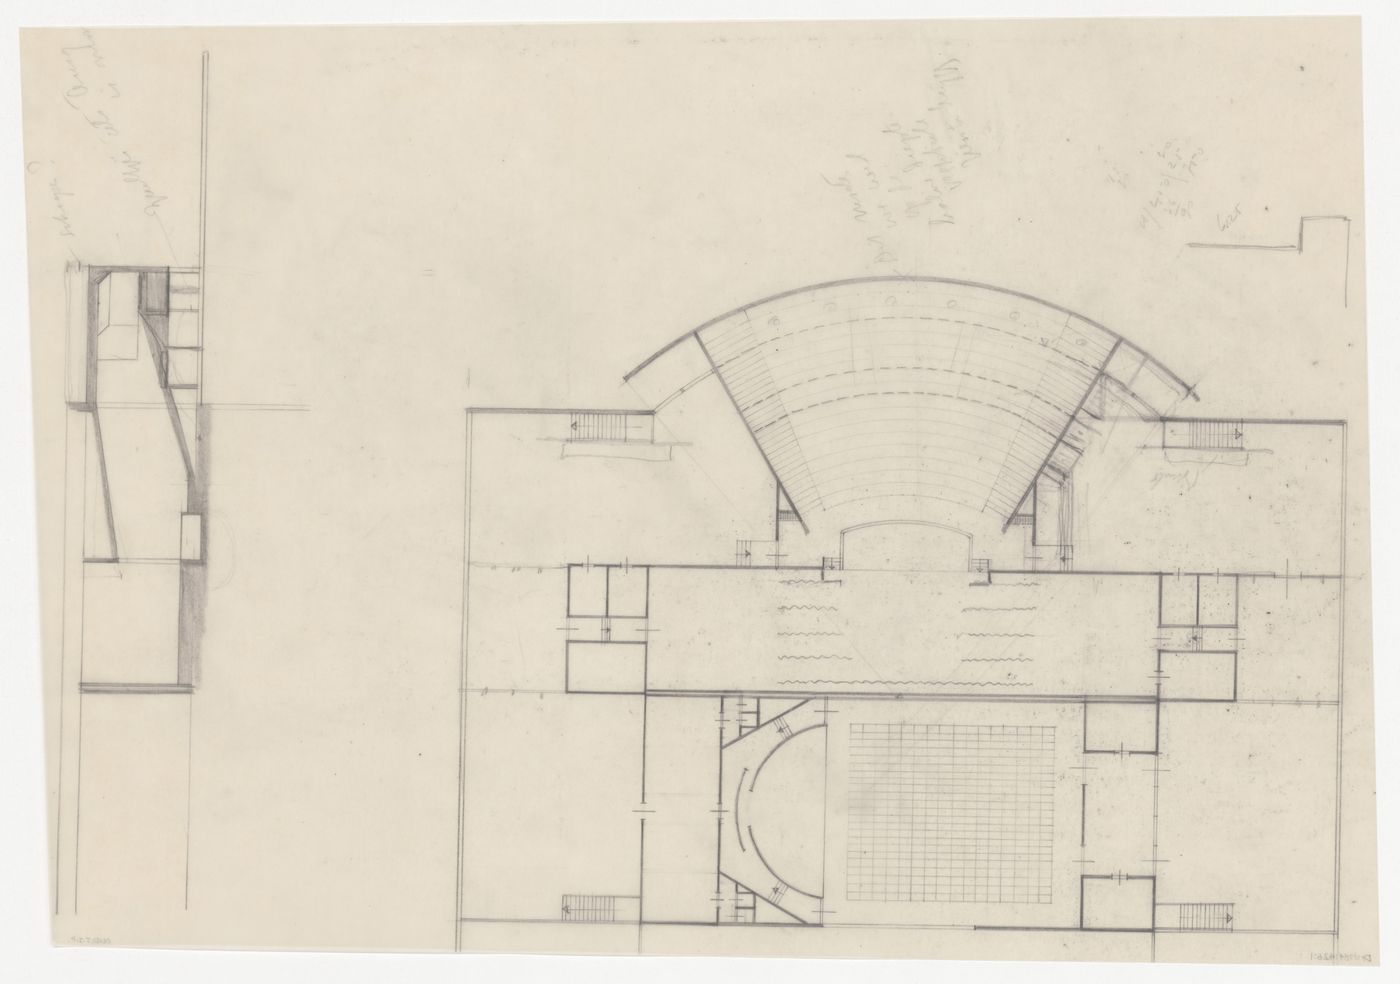 Plan and section for an auditorium for the north pavilion for the Congress Hall Complex, The Hague, Netherlands